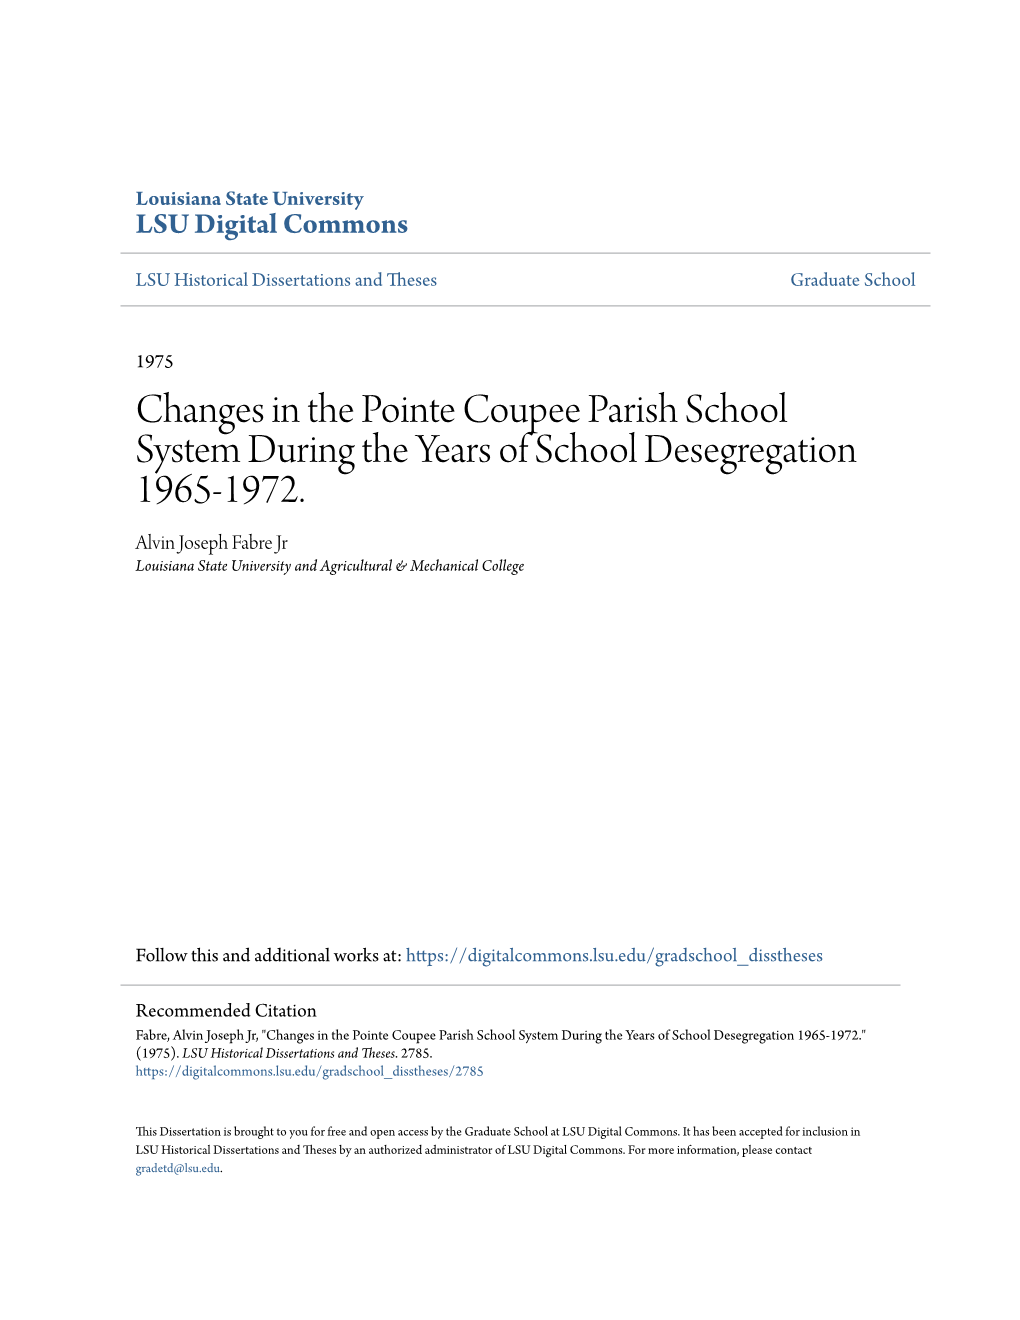 Changes in the Pointe Coupee Parish School System During the Years of School Desegregation 1965-1972